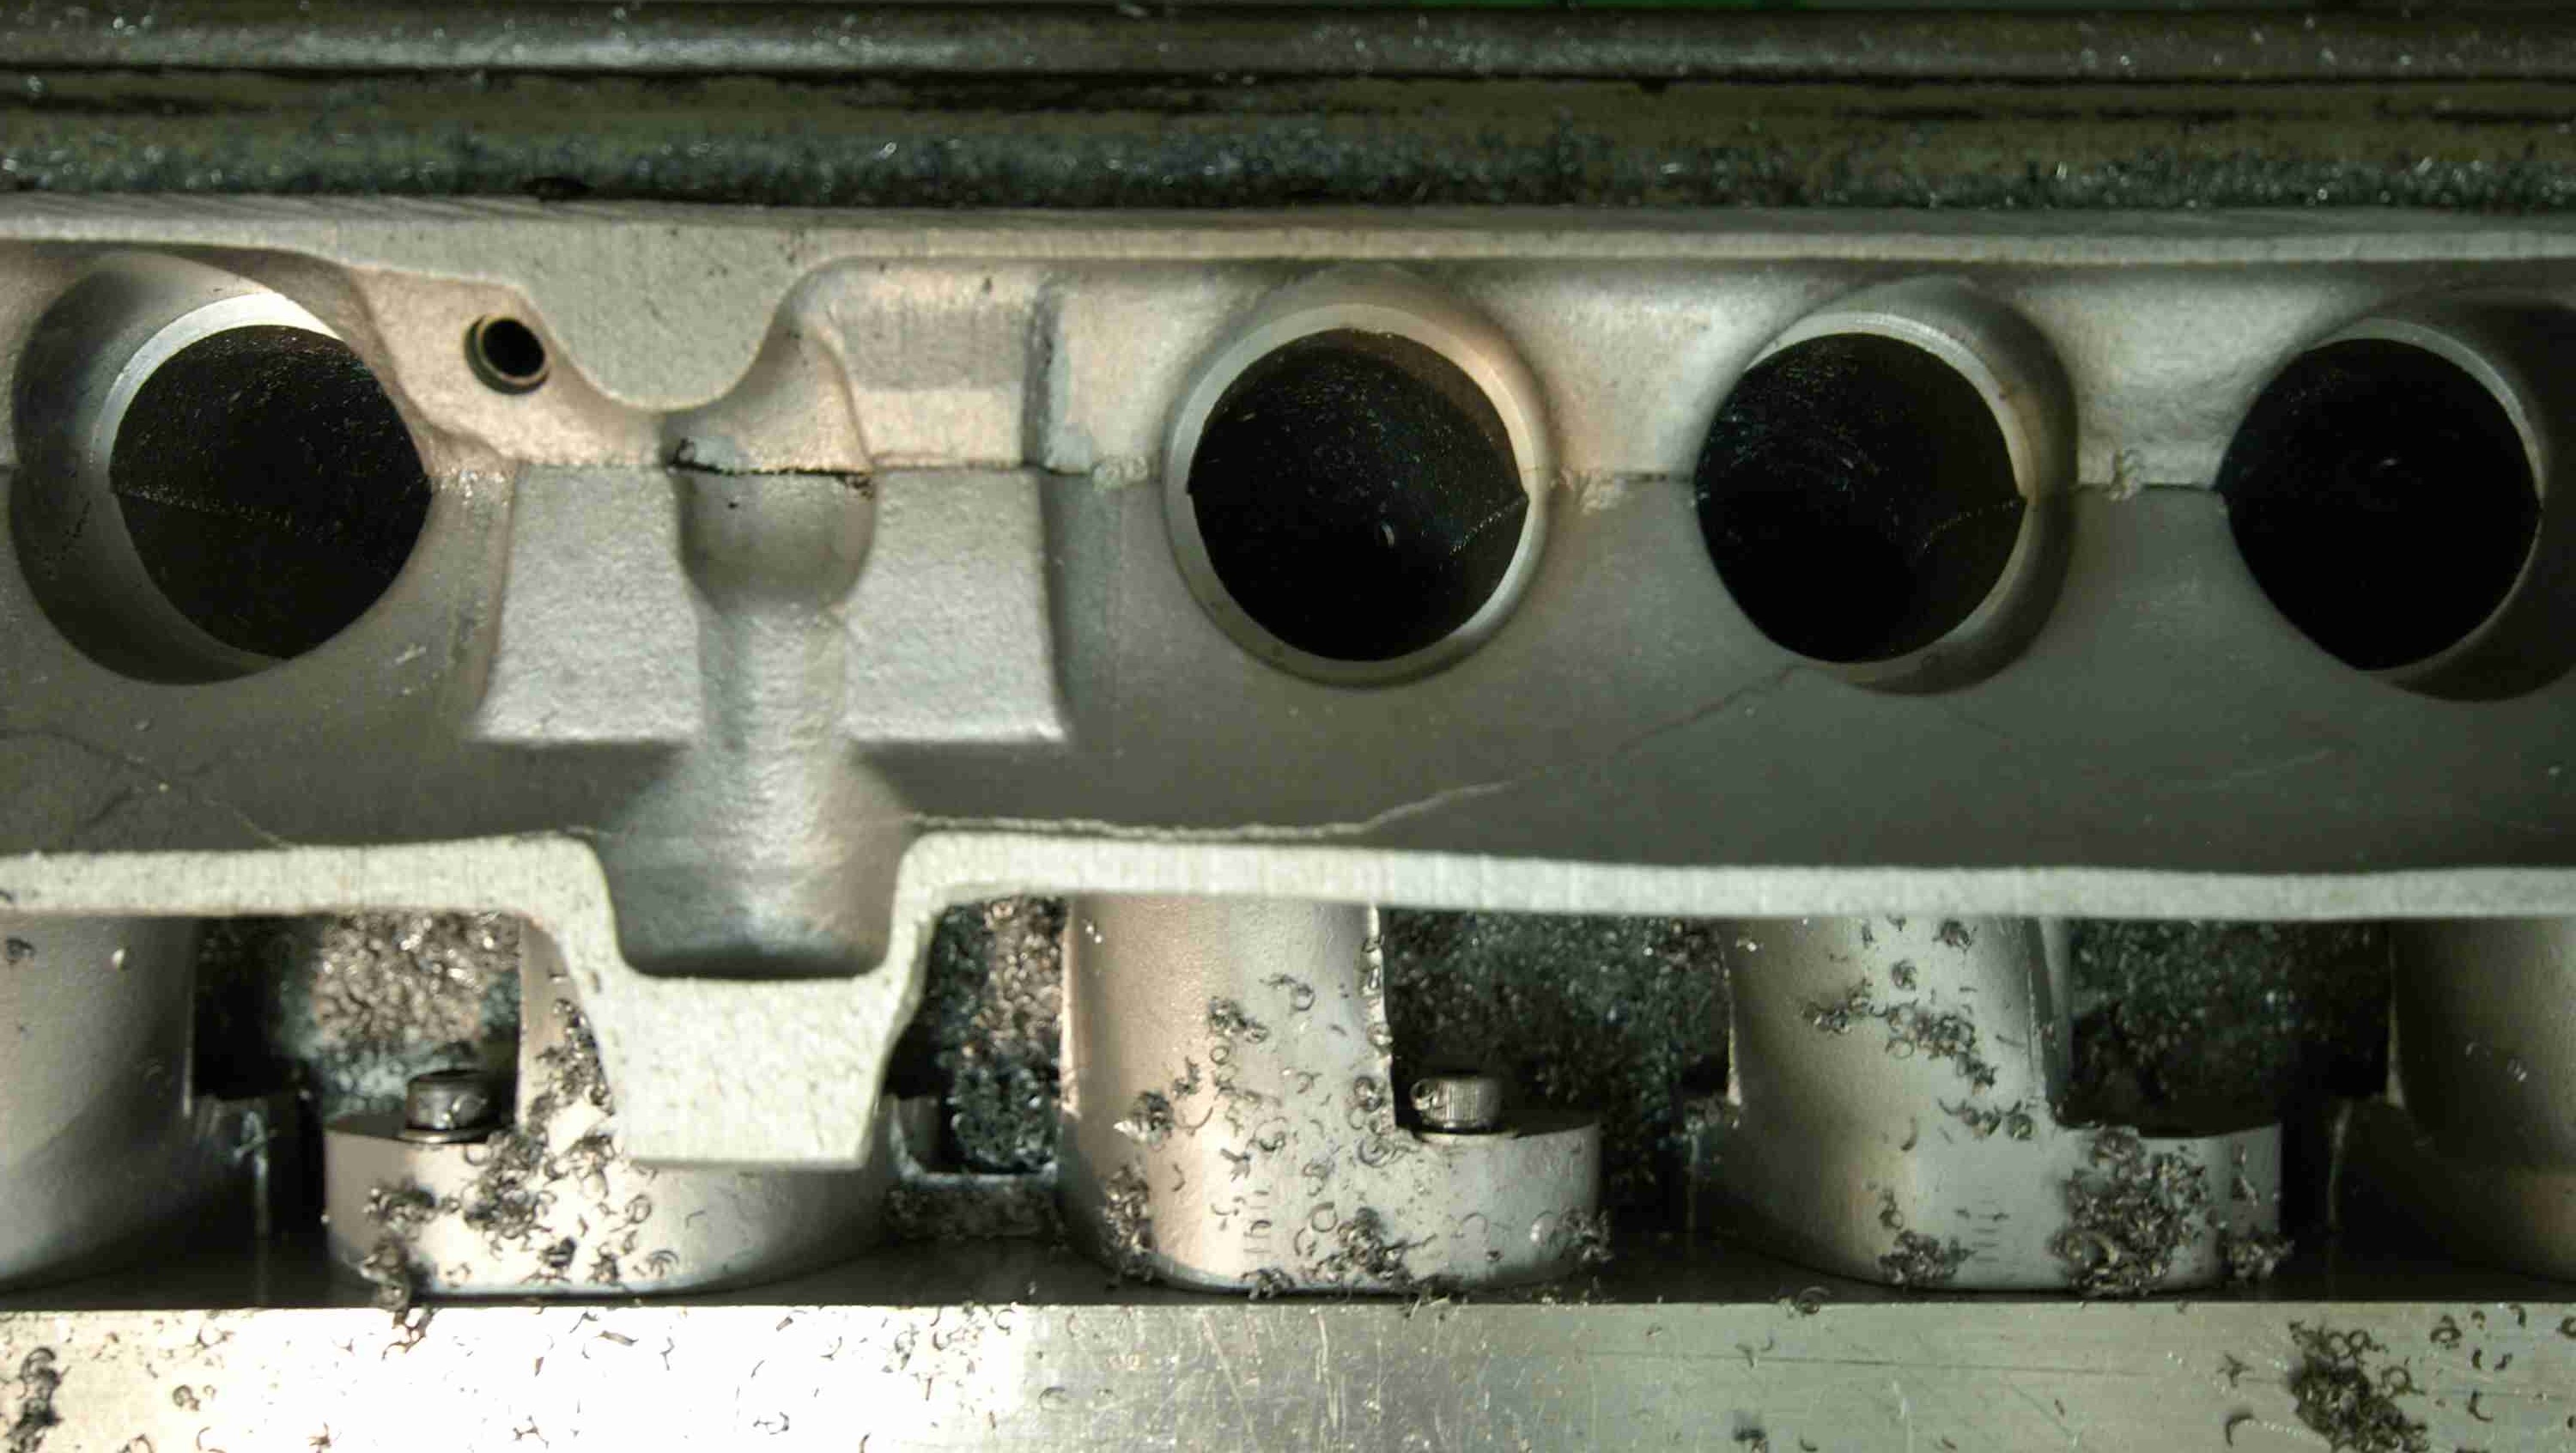 Cut-open V12 inlet manifold bored to accept bellmouth extensions to boost torque.